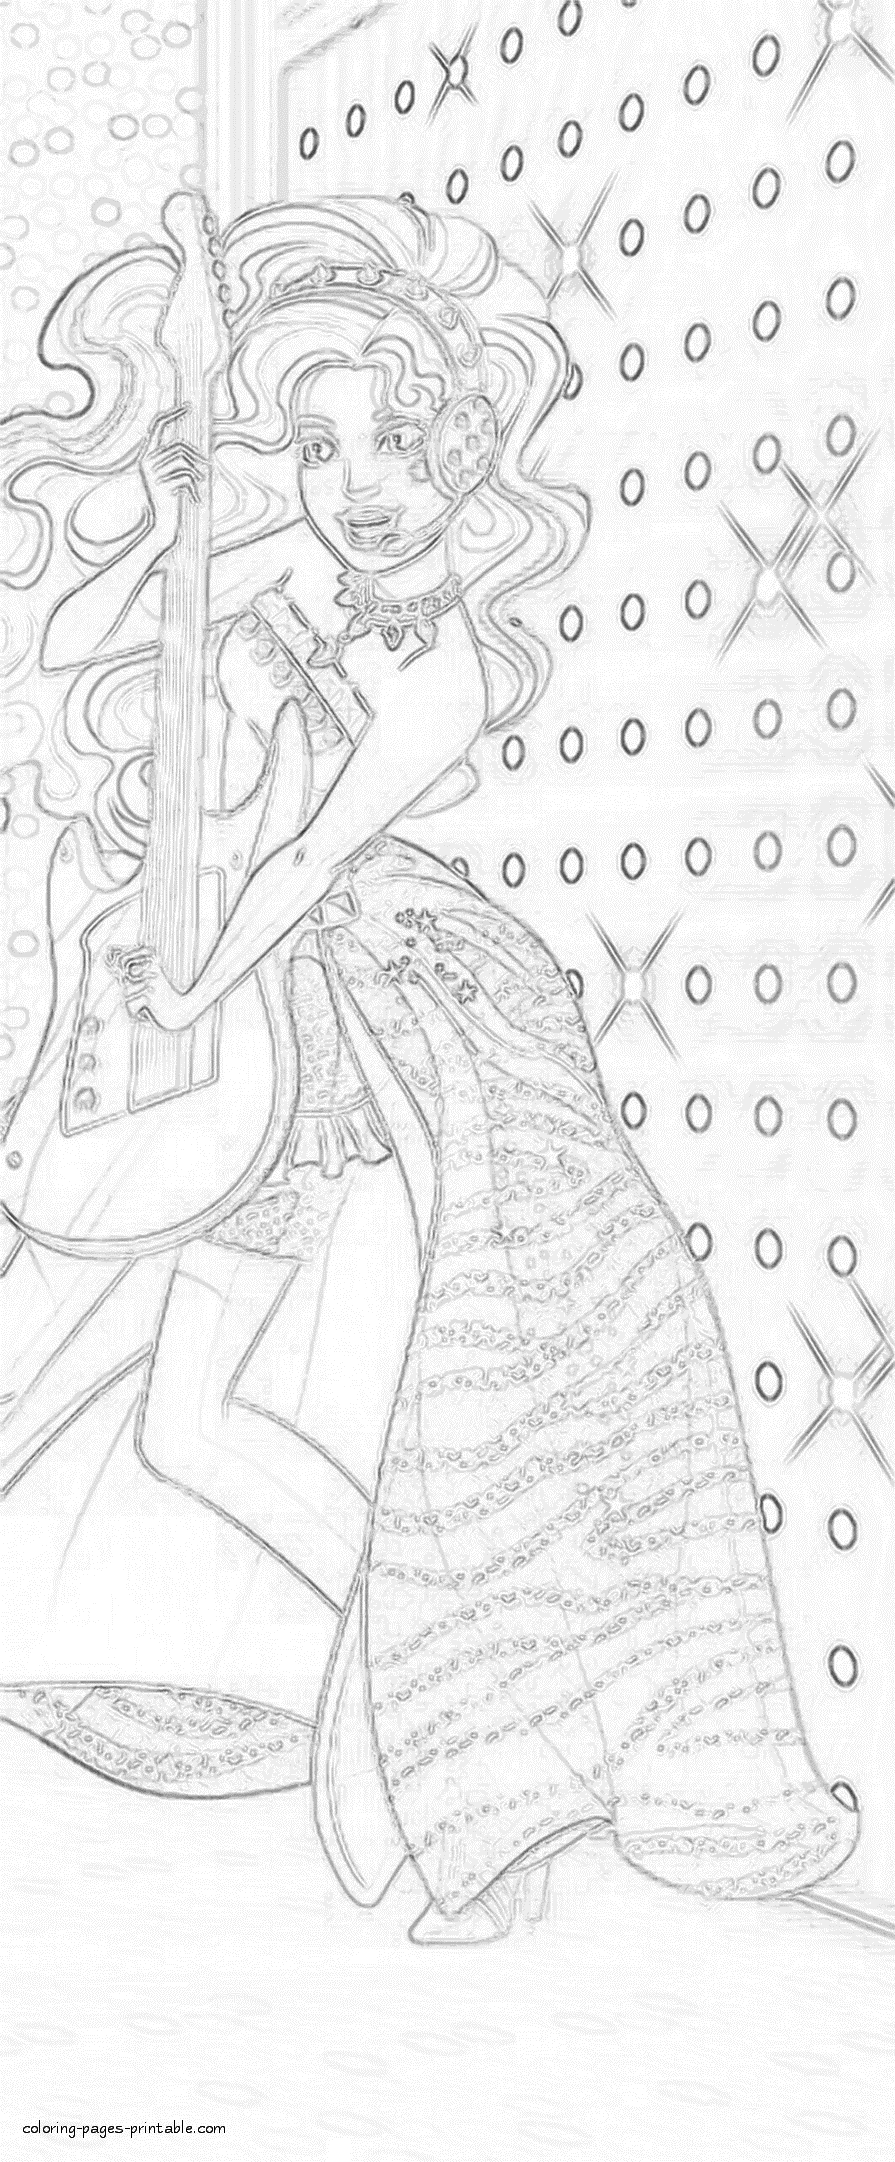 Barbie with a guitar coloring page || COLORING-PAGES-PRINTABLE.COM